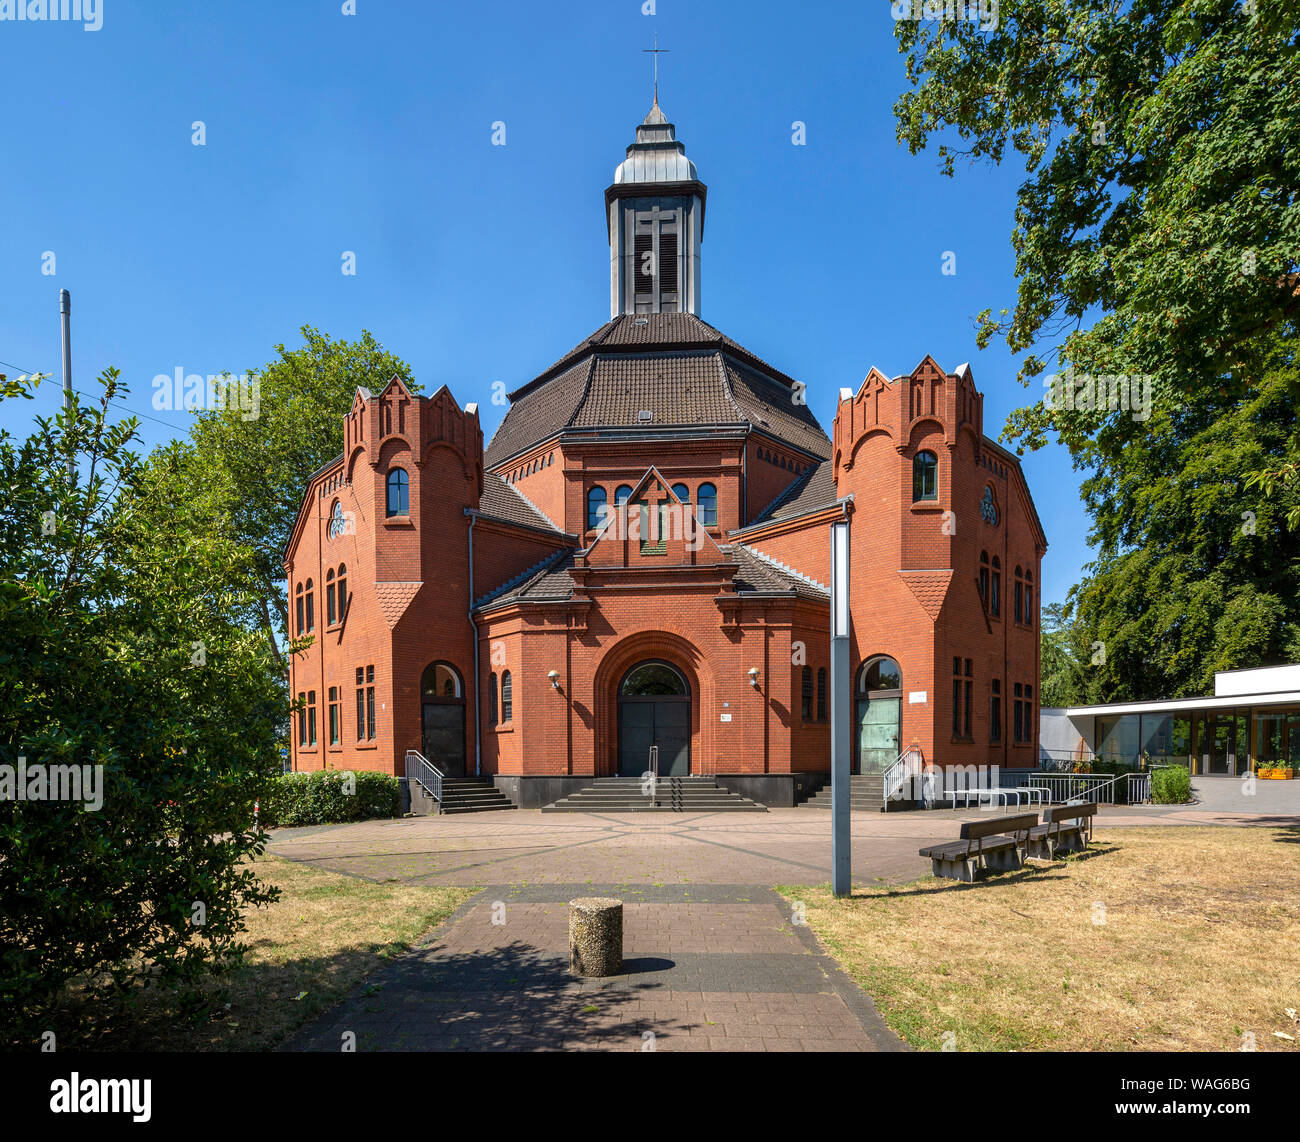 Architecture, outside view, field recording, brick building, brick building, brick church, building, Christian's cathedral, Christendom, Christianity, Stock Photo